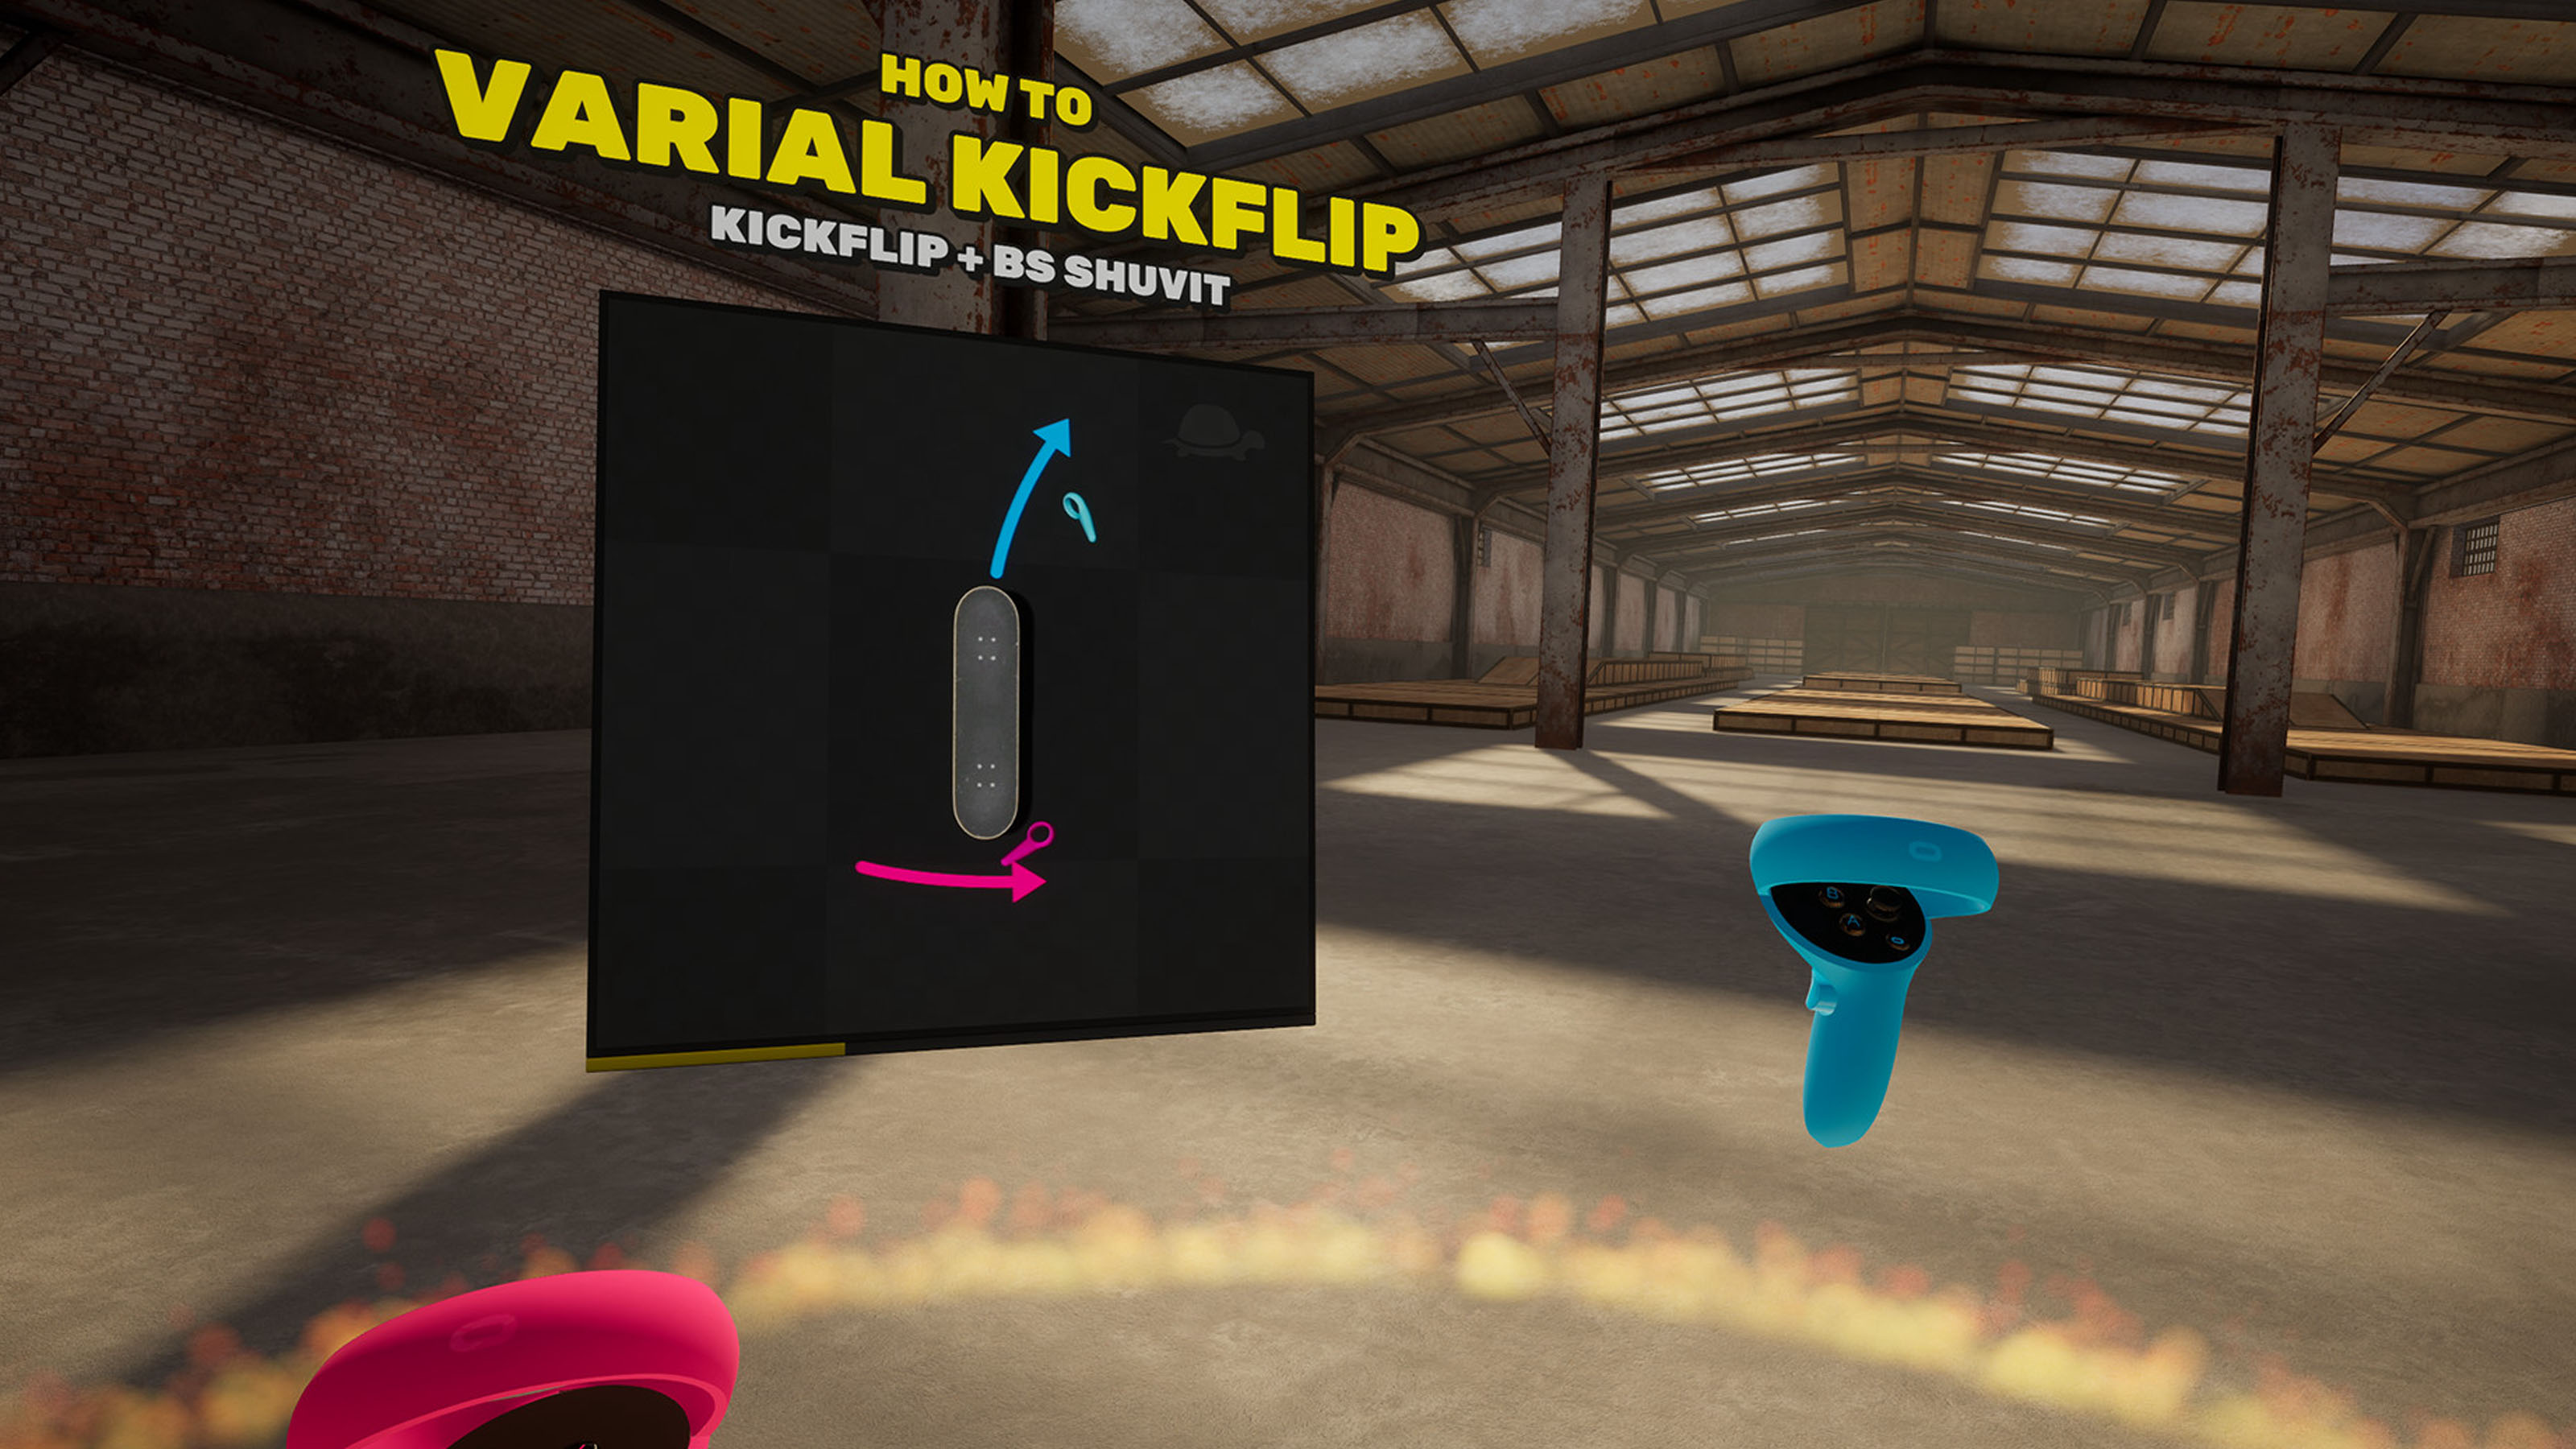 A screenshot from the game VR Skater showing a tutorial for a skateboarding trick